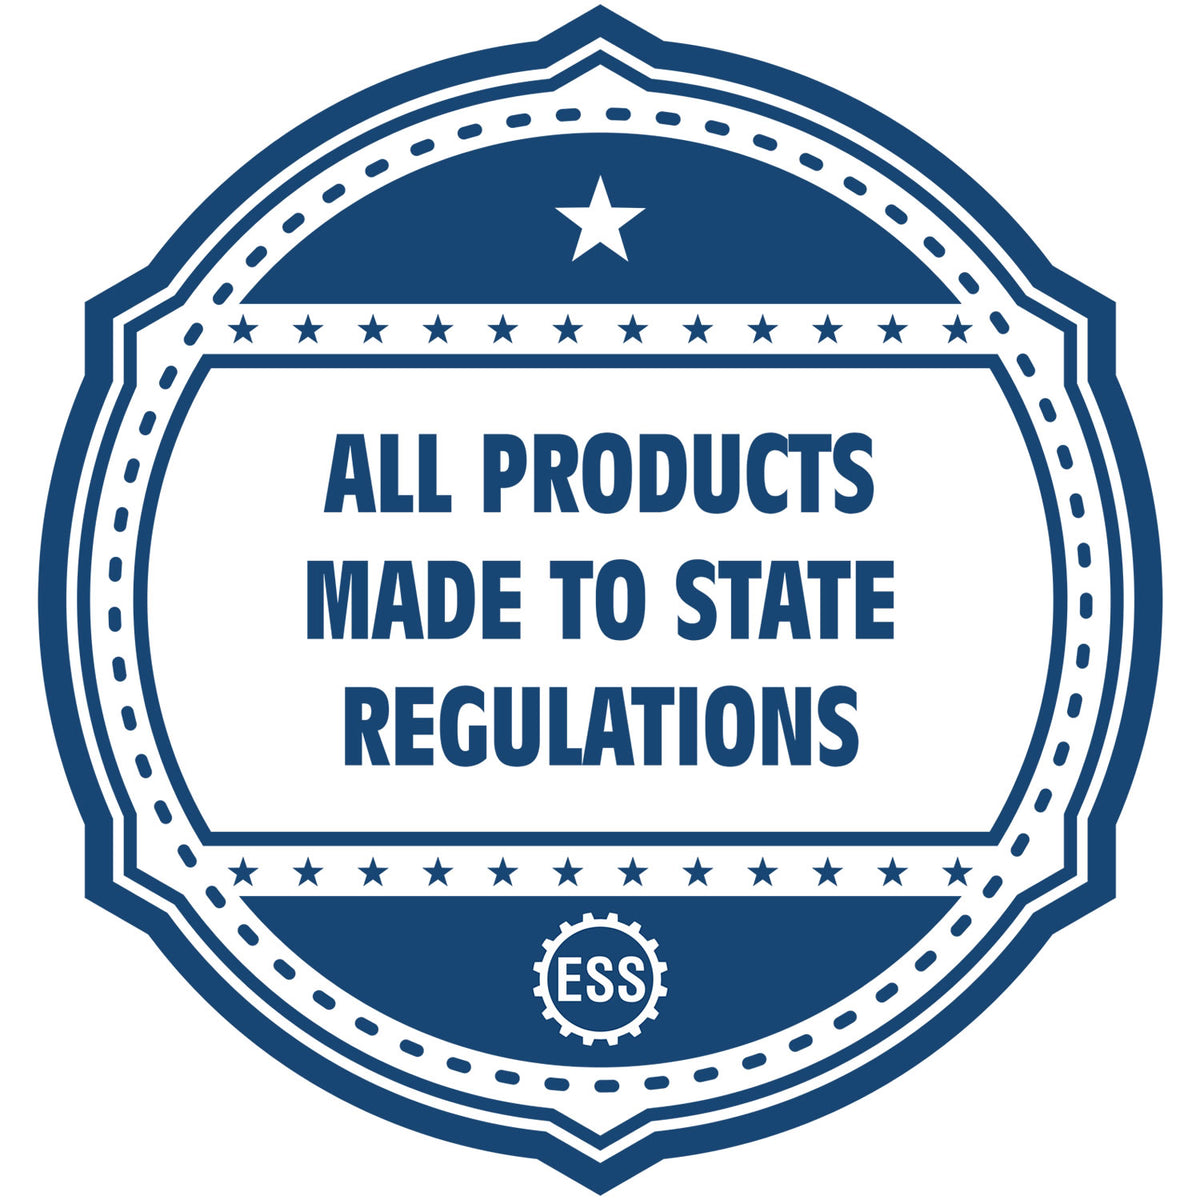 An icon or badge element for the Slim Pre-Inked South Dakota Architect Seal Stamp showing that this product is made in compliance with state regulations.